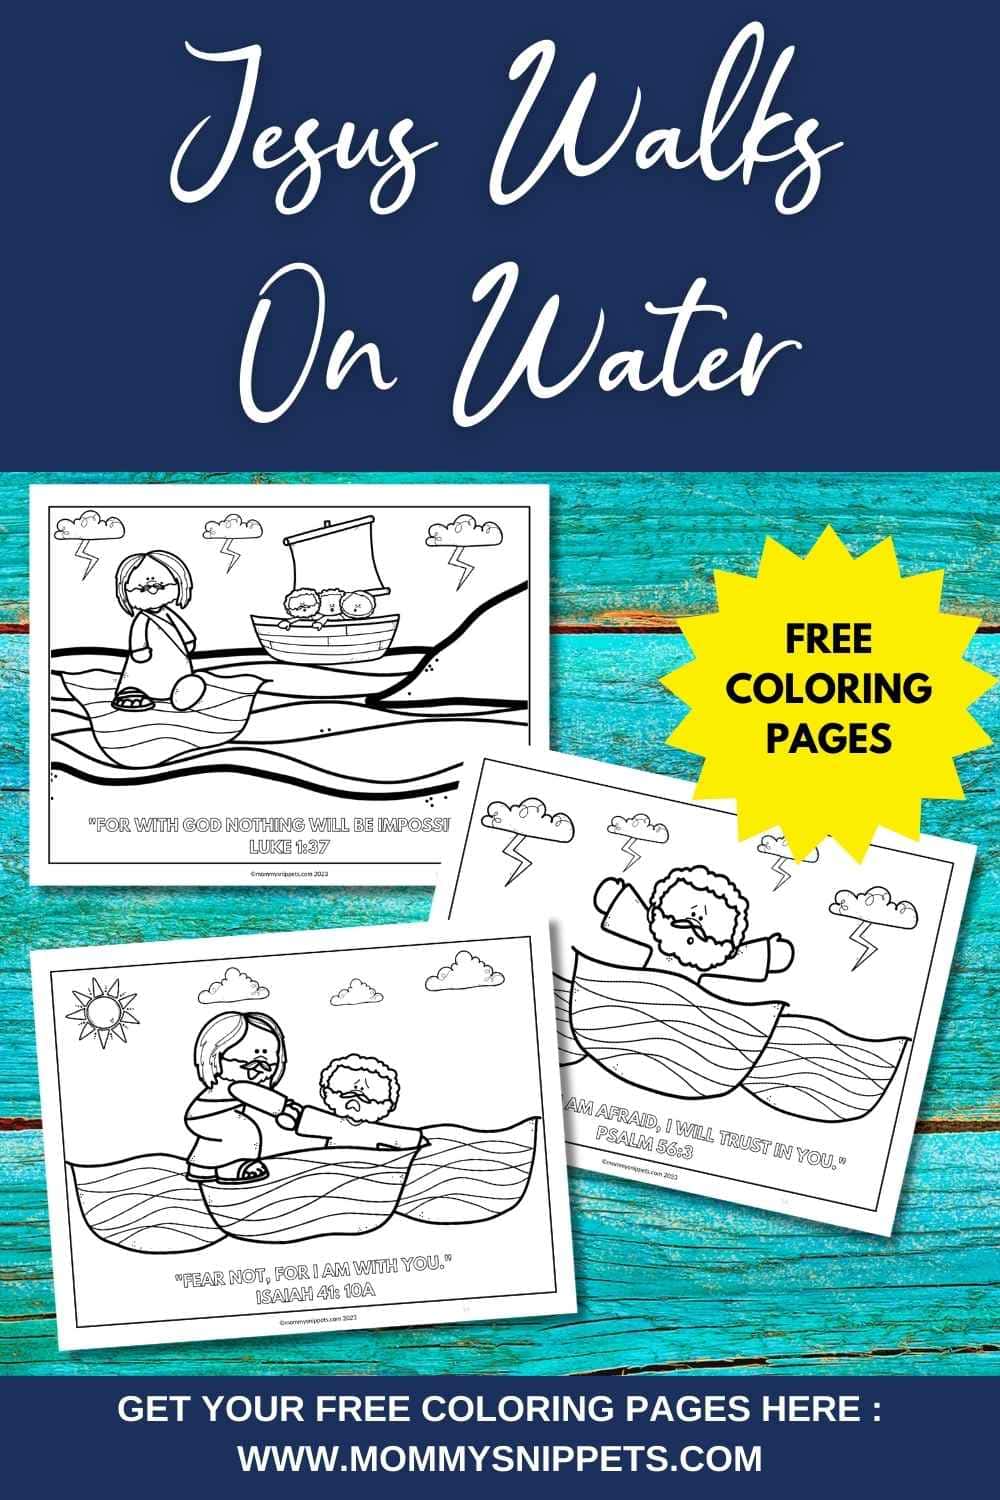 Download and print THREE free Jesus Walks On Water coloring pages with a Bible verse to memorize on each sheet.